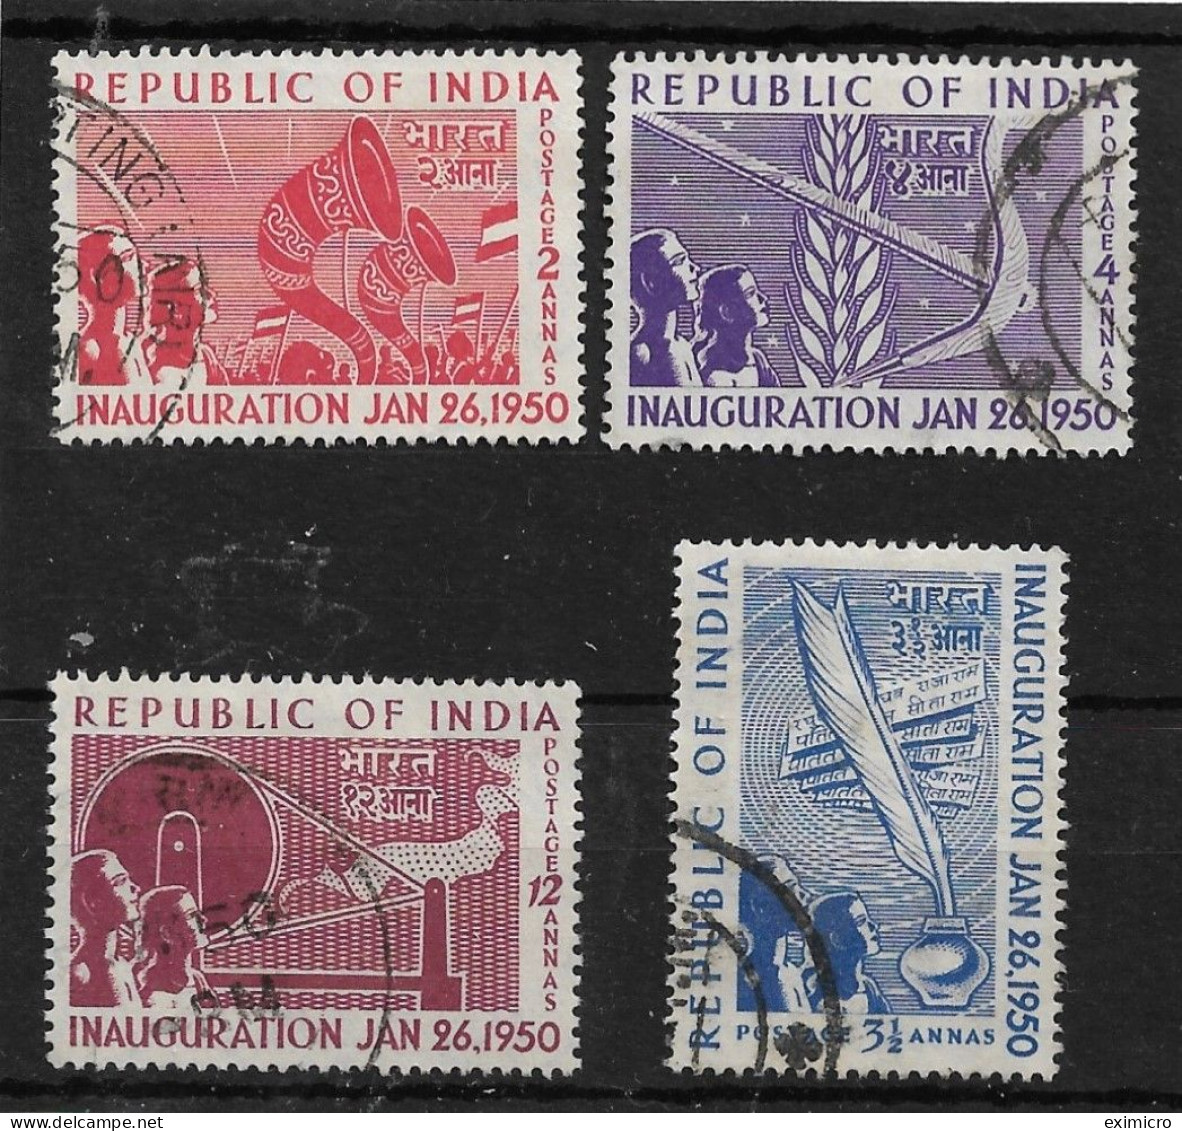 INDIA 1950 INAUGURATION OF REPUBLIC SET SG 329/332 FINE USED Cat £17 - Used Stamps